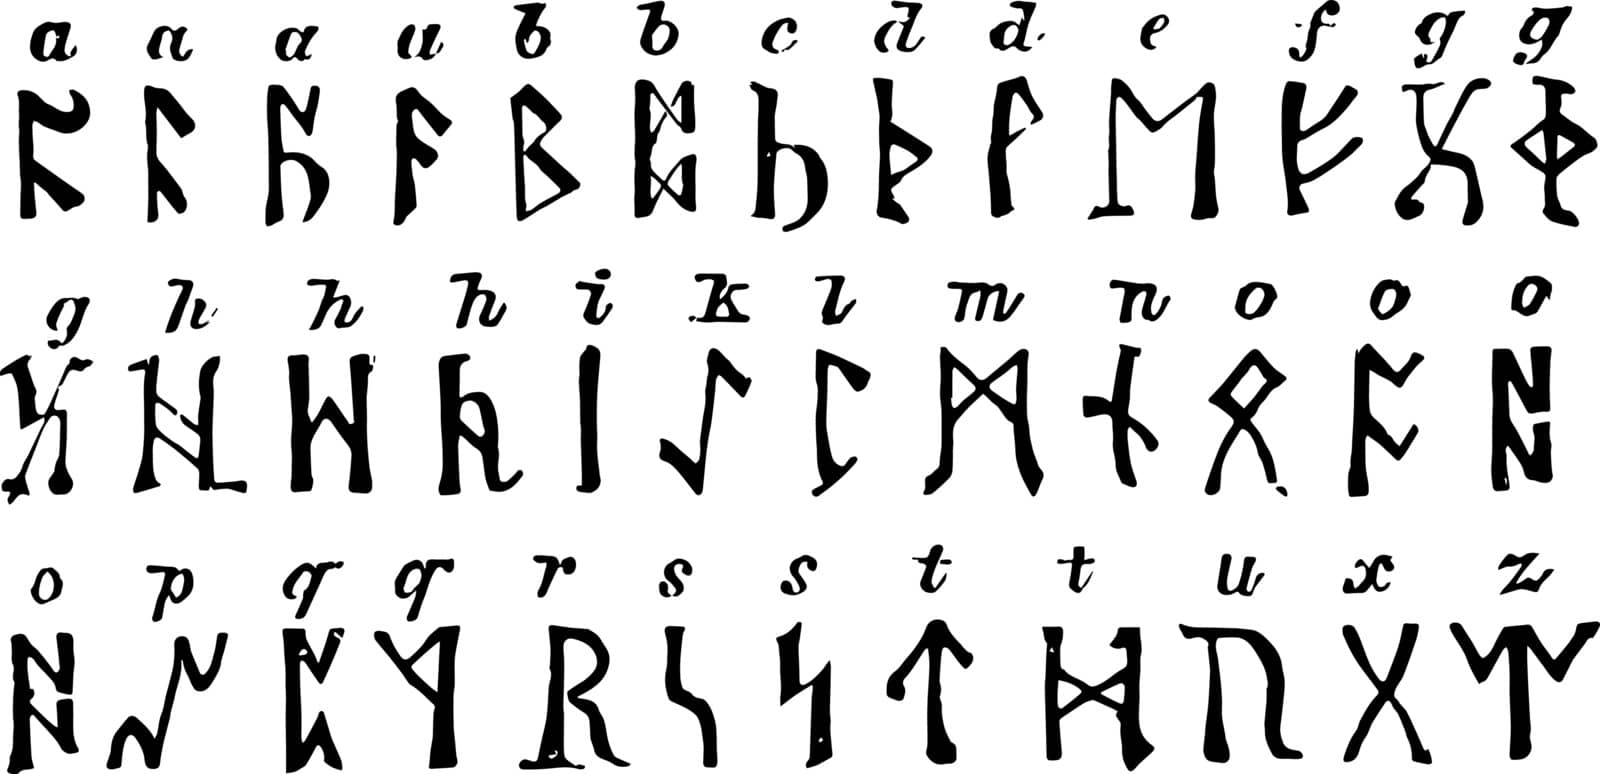 Runic Alphabet which is the complete runic alphabet, vintage line drawing or engraving illustration.